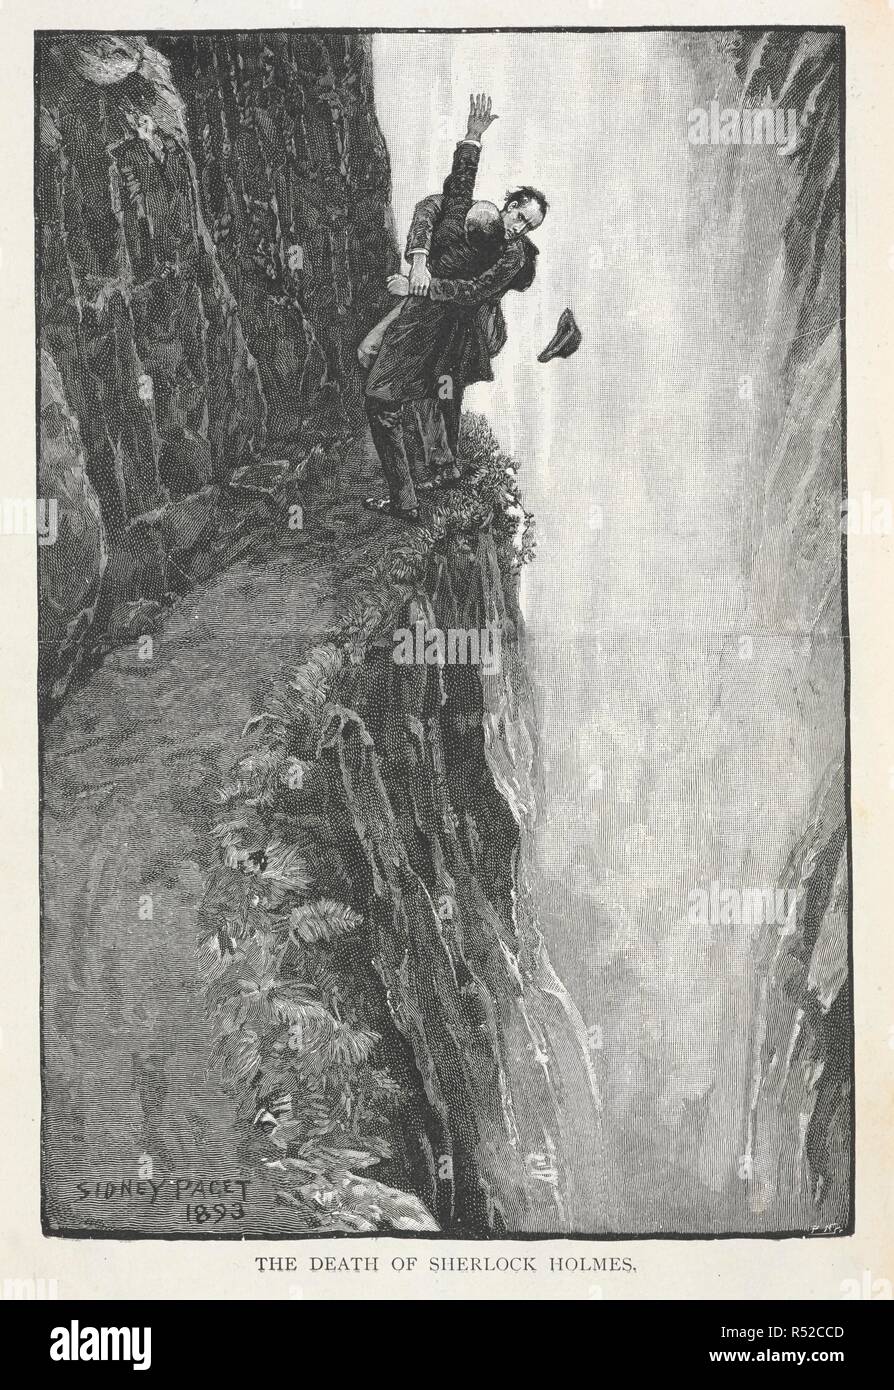 'The death of Sherlock Holmes.' Sherlock holmes and Professor Moriarty fighting at the Reichenbach falls. Illustration for the story 'the adventure of the final problem.'. The Strand magazine : an illustrated monthly / edited by G. Newnes. London : George Newnes. 1893. July to December. Source: P.P.6004.glk page 558. Author: DOYLE, ARTHUR CONAN. Paget, Sydney. Stock Photo